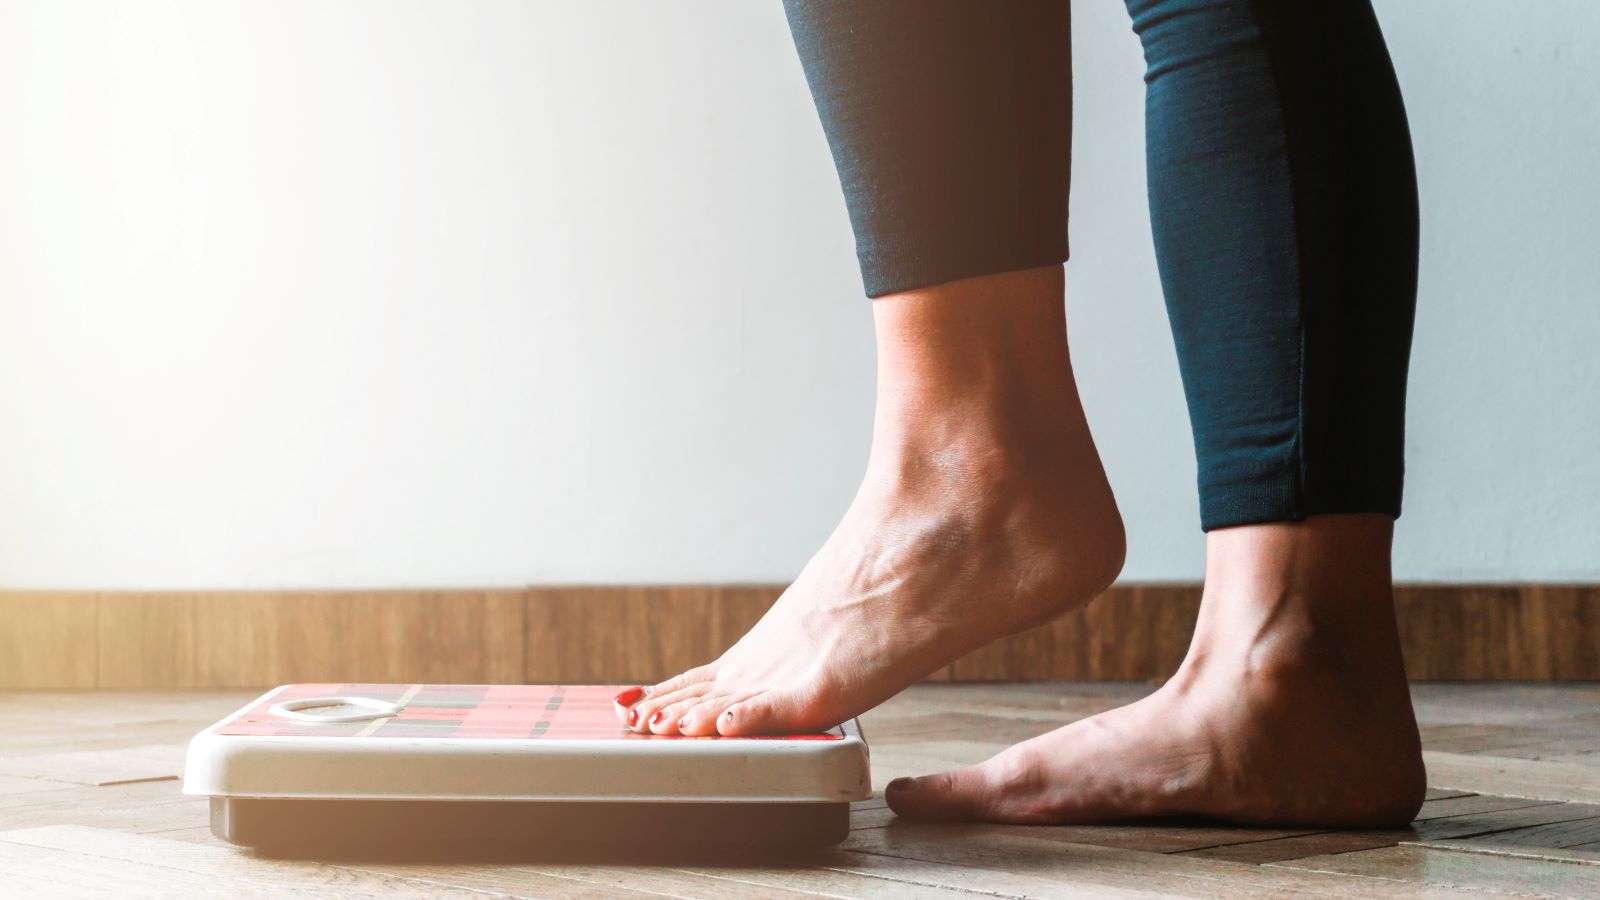 Our weight loss expert explains some of the lesser-known causes of weight gain and obesity, that go beyond diet and exercise.